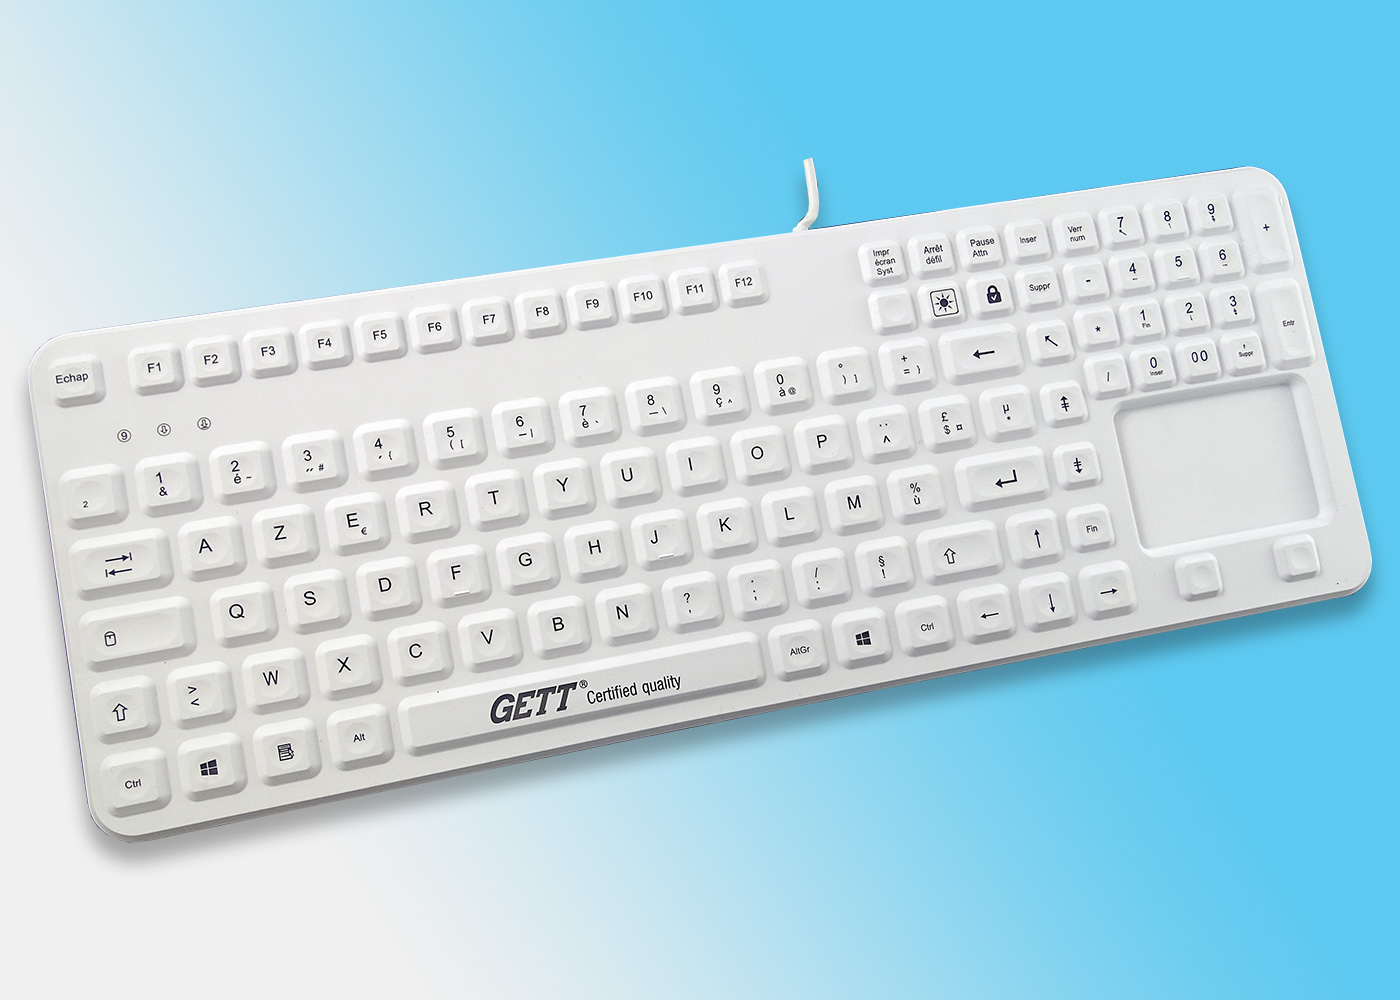 Clavier silicone série Cleantype® Prime Pro+